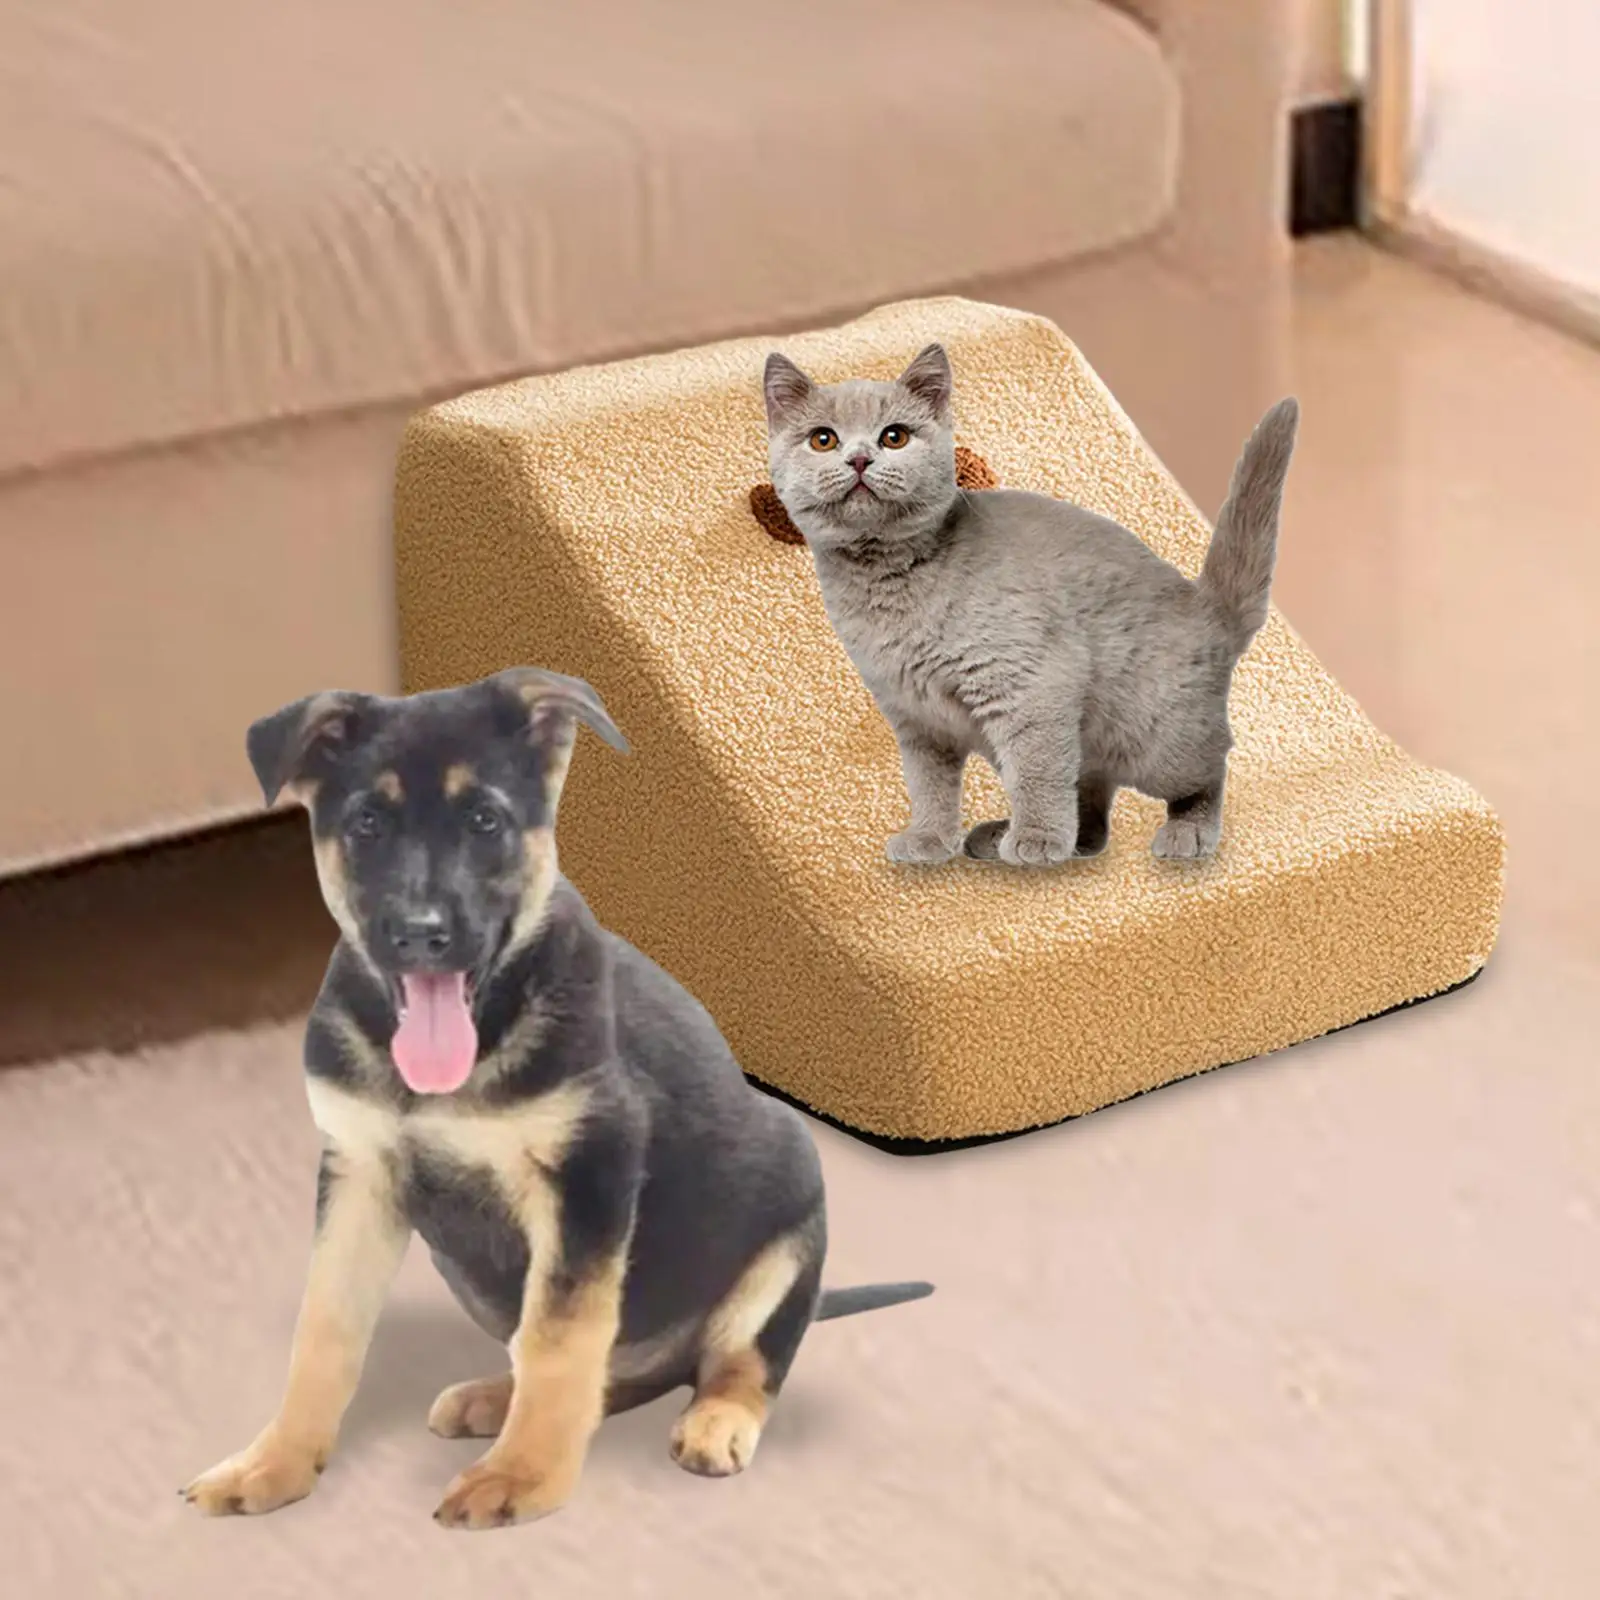 Dog Stairs Removable Cover Gentle Slope Shape Sturdy Soft for Older Dogs, Cats Portable Versatile Non Slip Dog Climbing Ladder